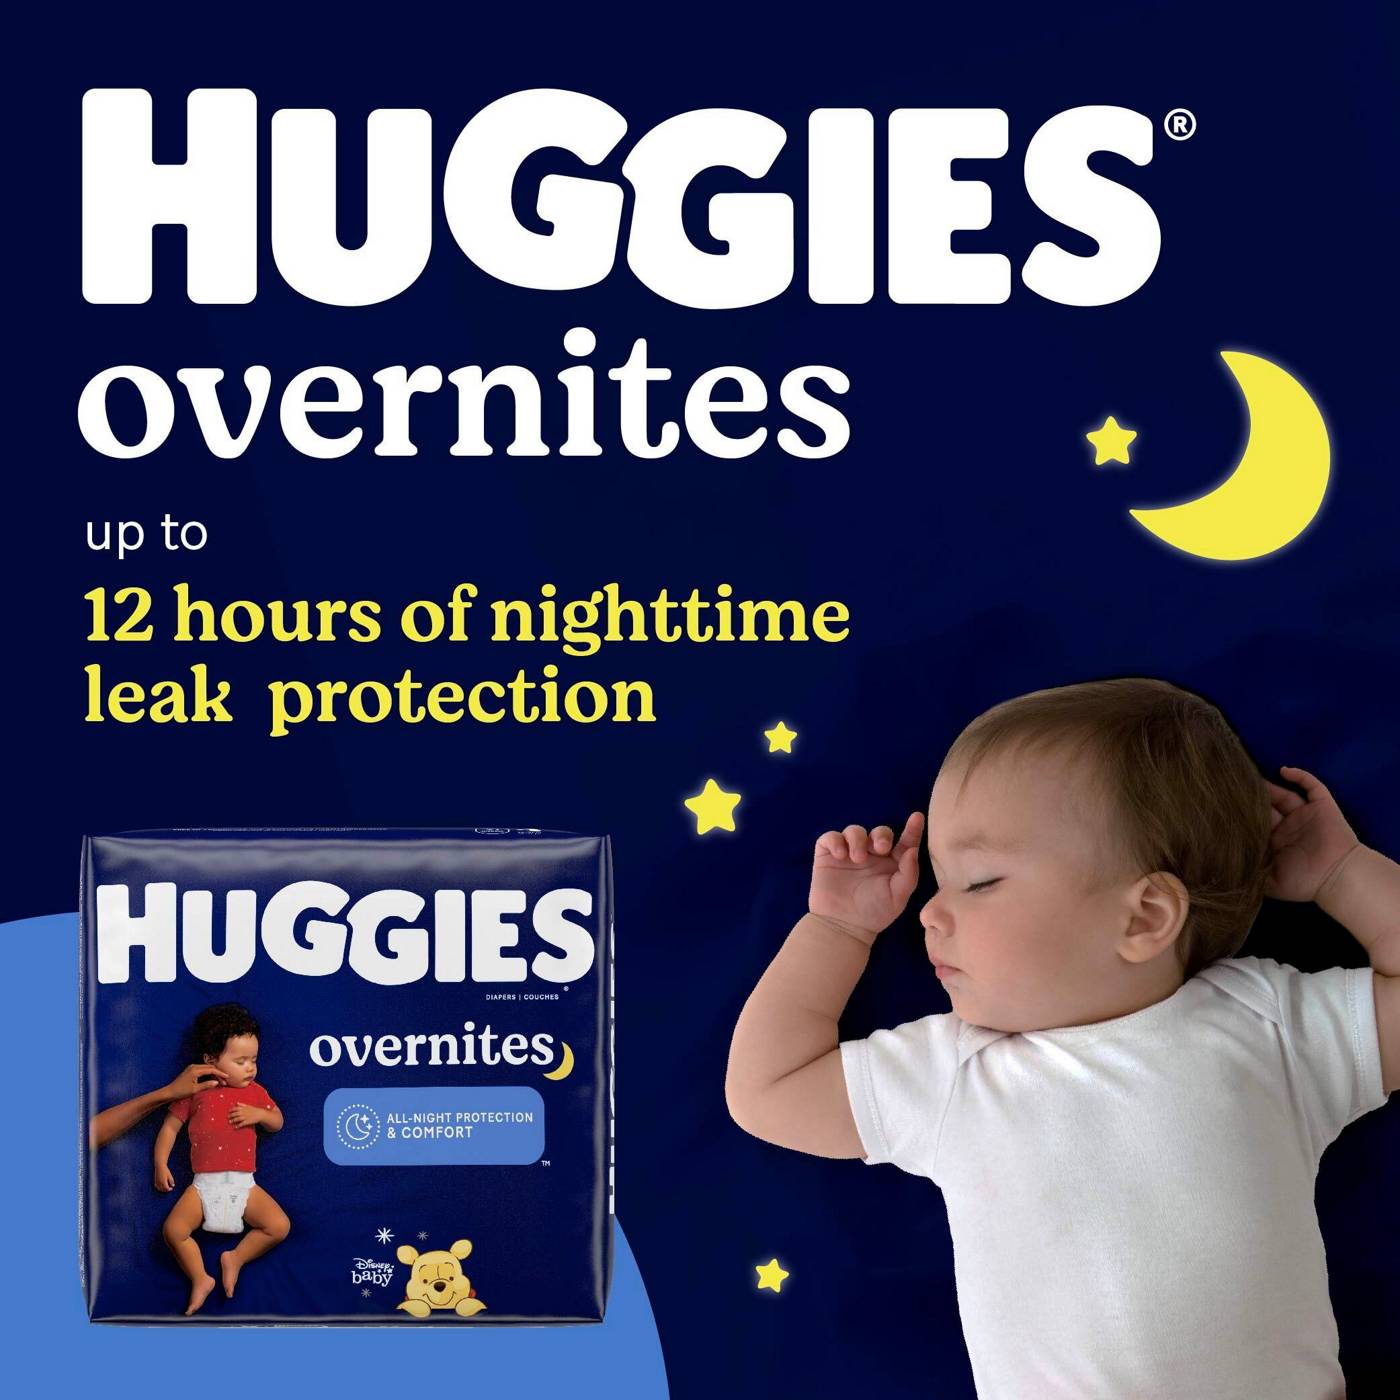 Huggies Little Movers Baby Diapers - Size 4 - Shop Diapers at H-E-B